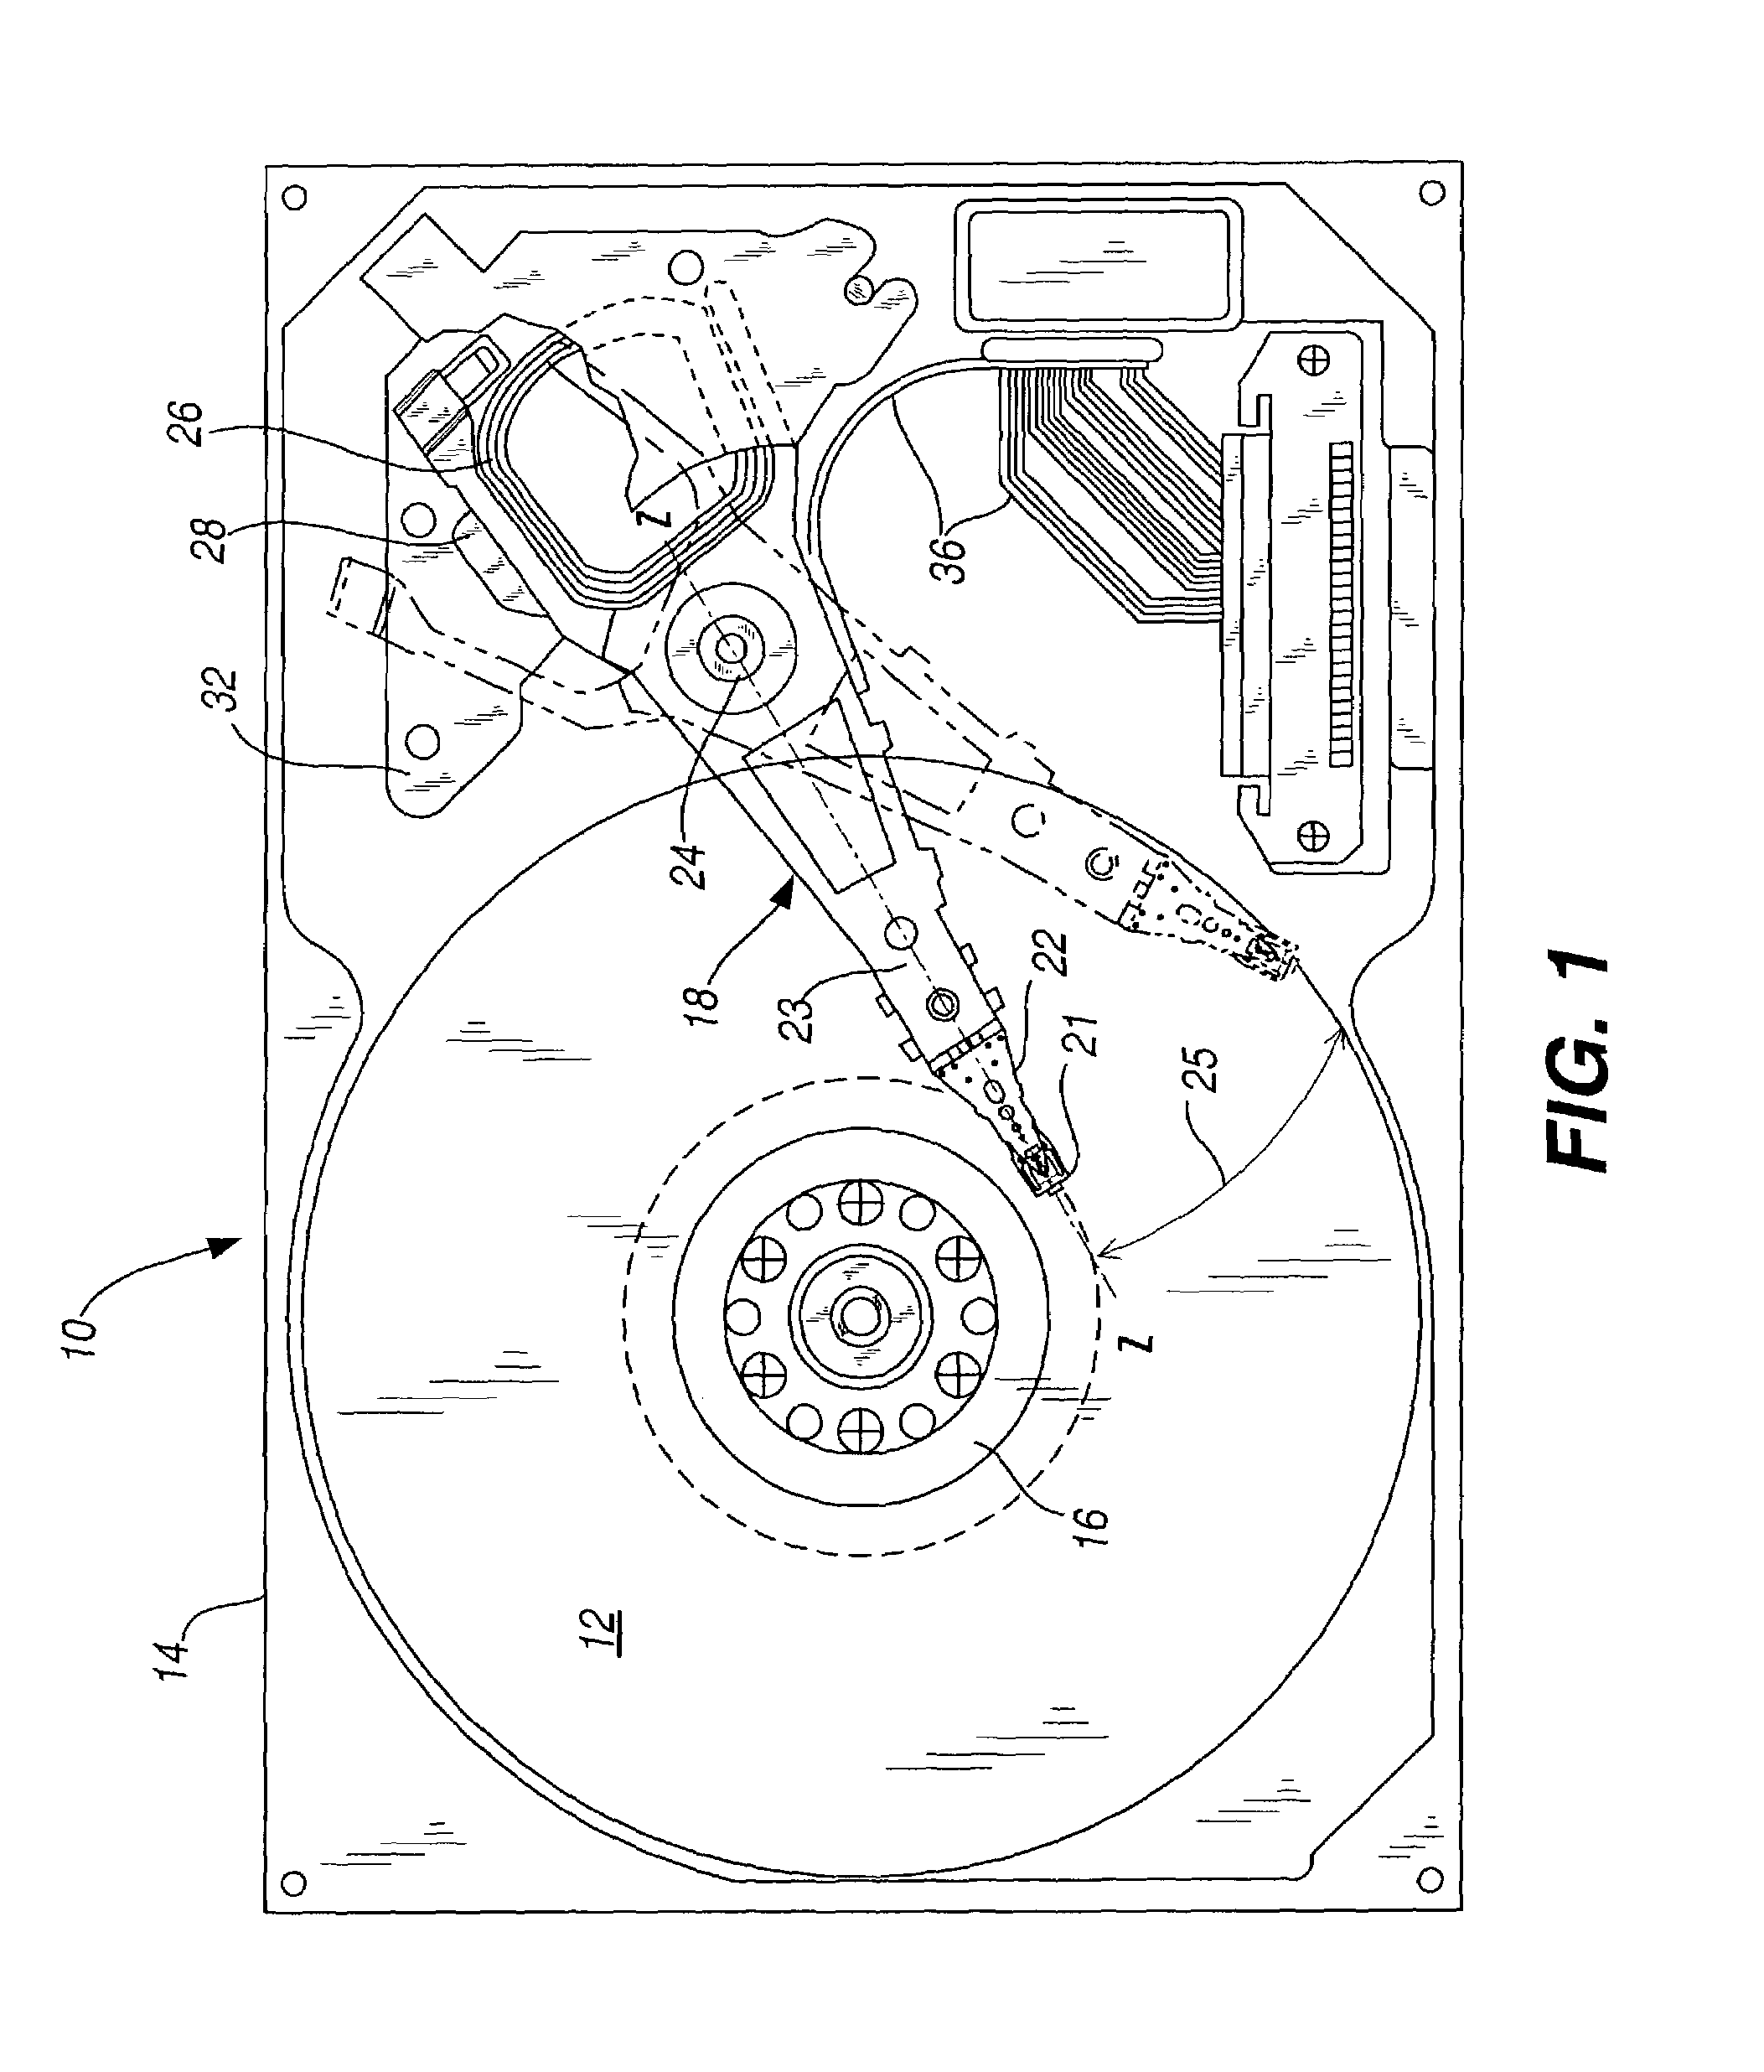 Micro-flexure suspension including piezoelectric elements for secondary actuation